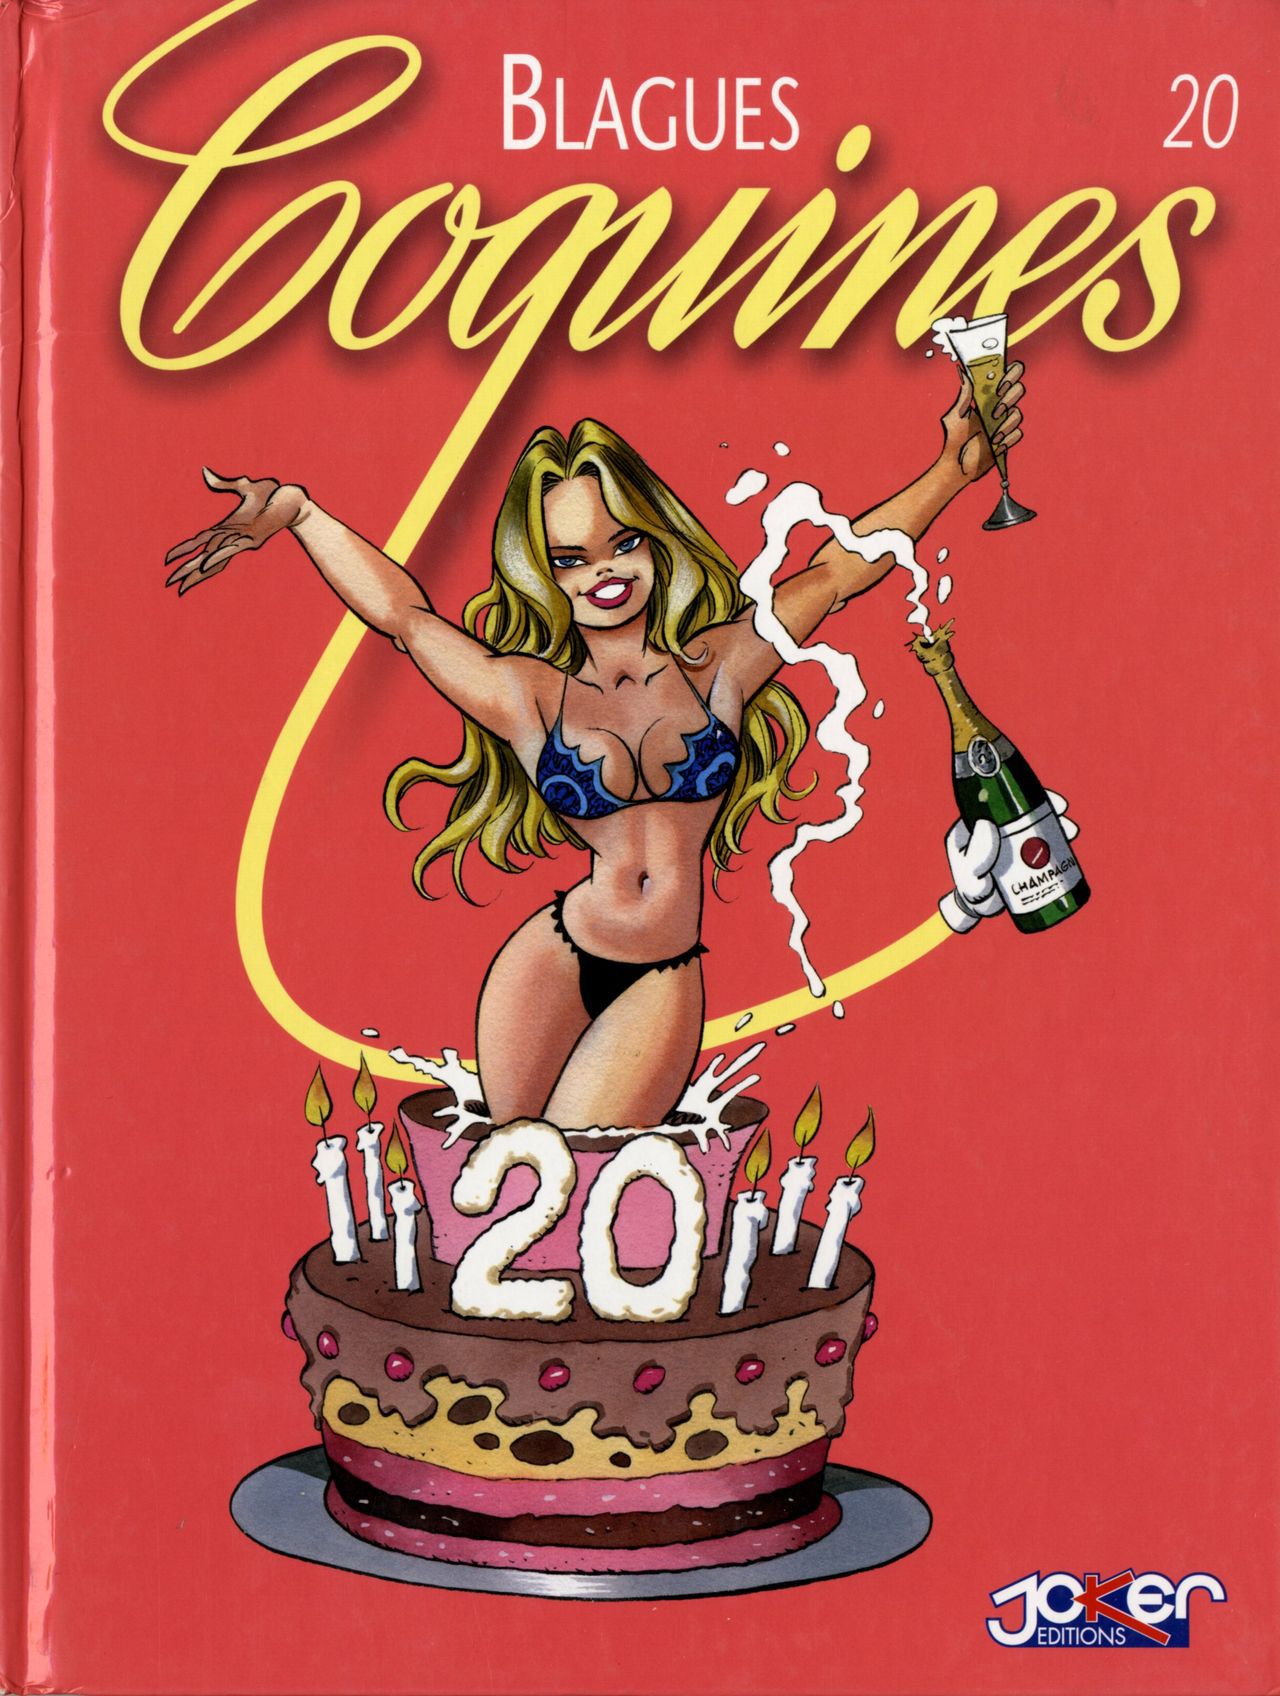 Blagues Coquines Volume 20 [French] 1